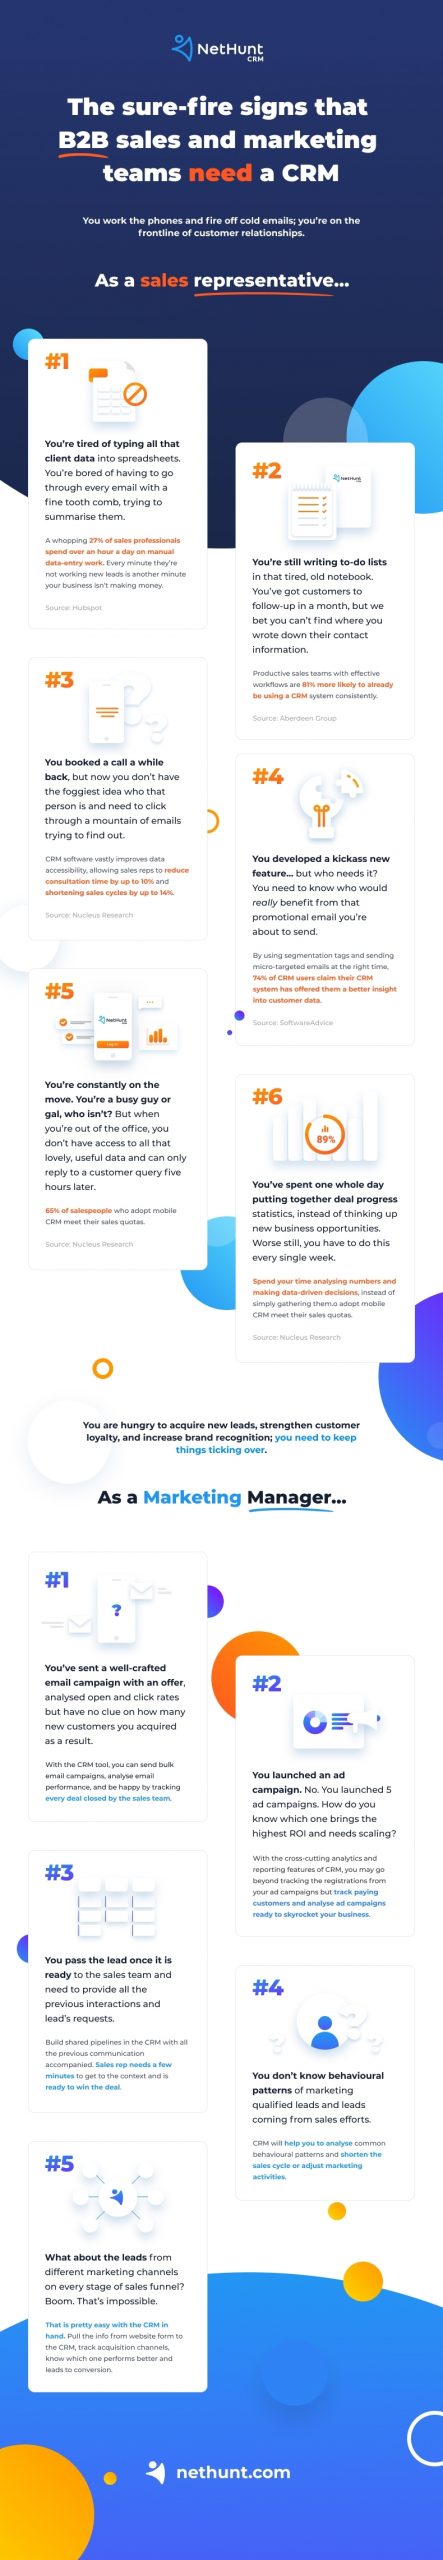 The Sure-Fire Signs that B2B Sales and Marketing Teams Need a CRM [Infographic]